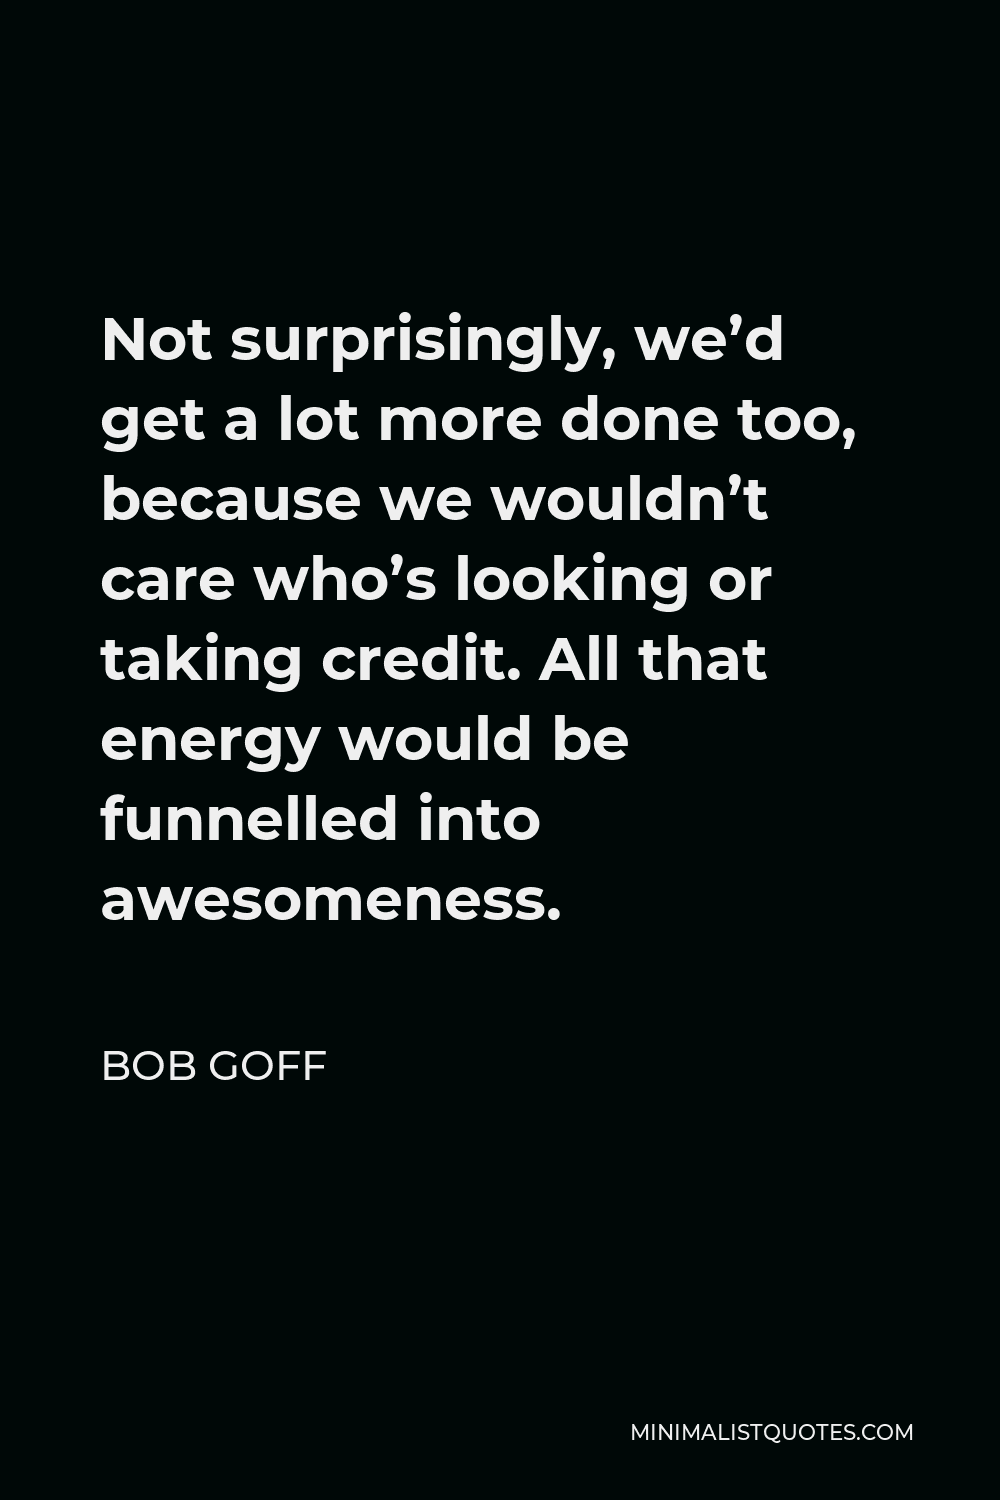 Bob Goff Quote - Not surprisingly, we’d get a lot more done too, because we wouldn’t care who’s looking or taking credit. All that energy would be funnelled into awesomeness.